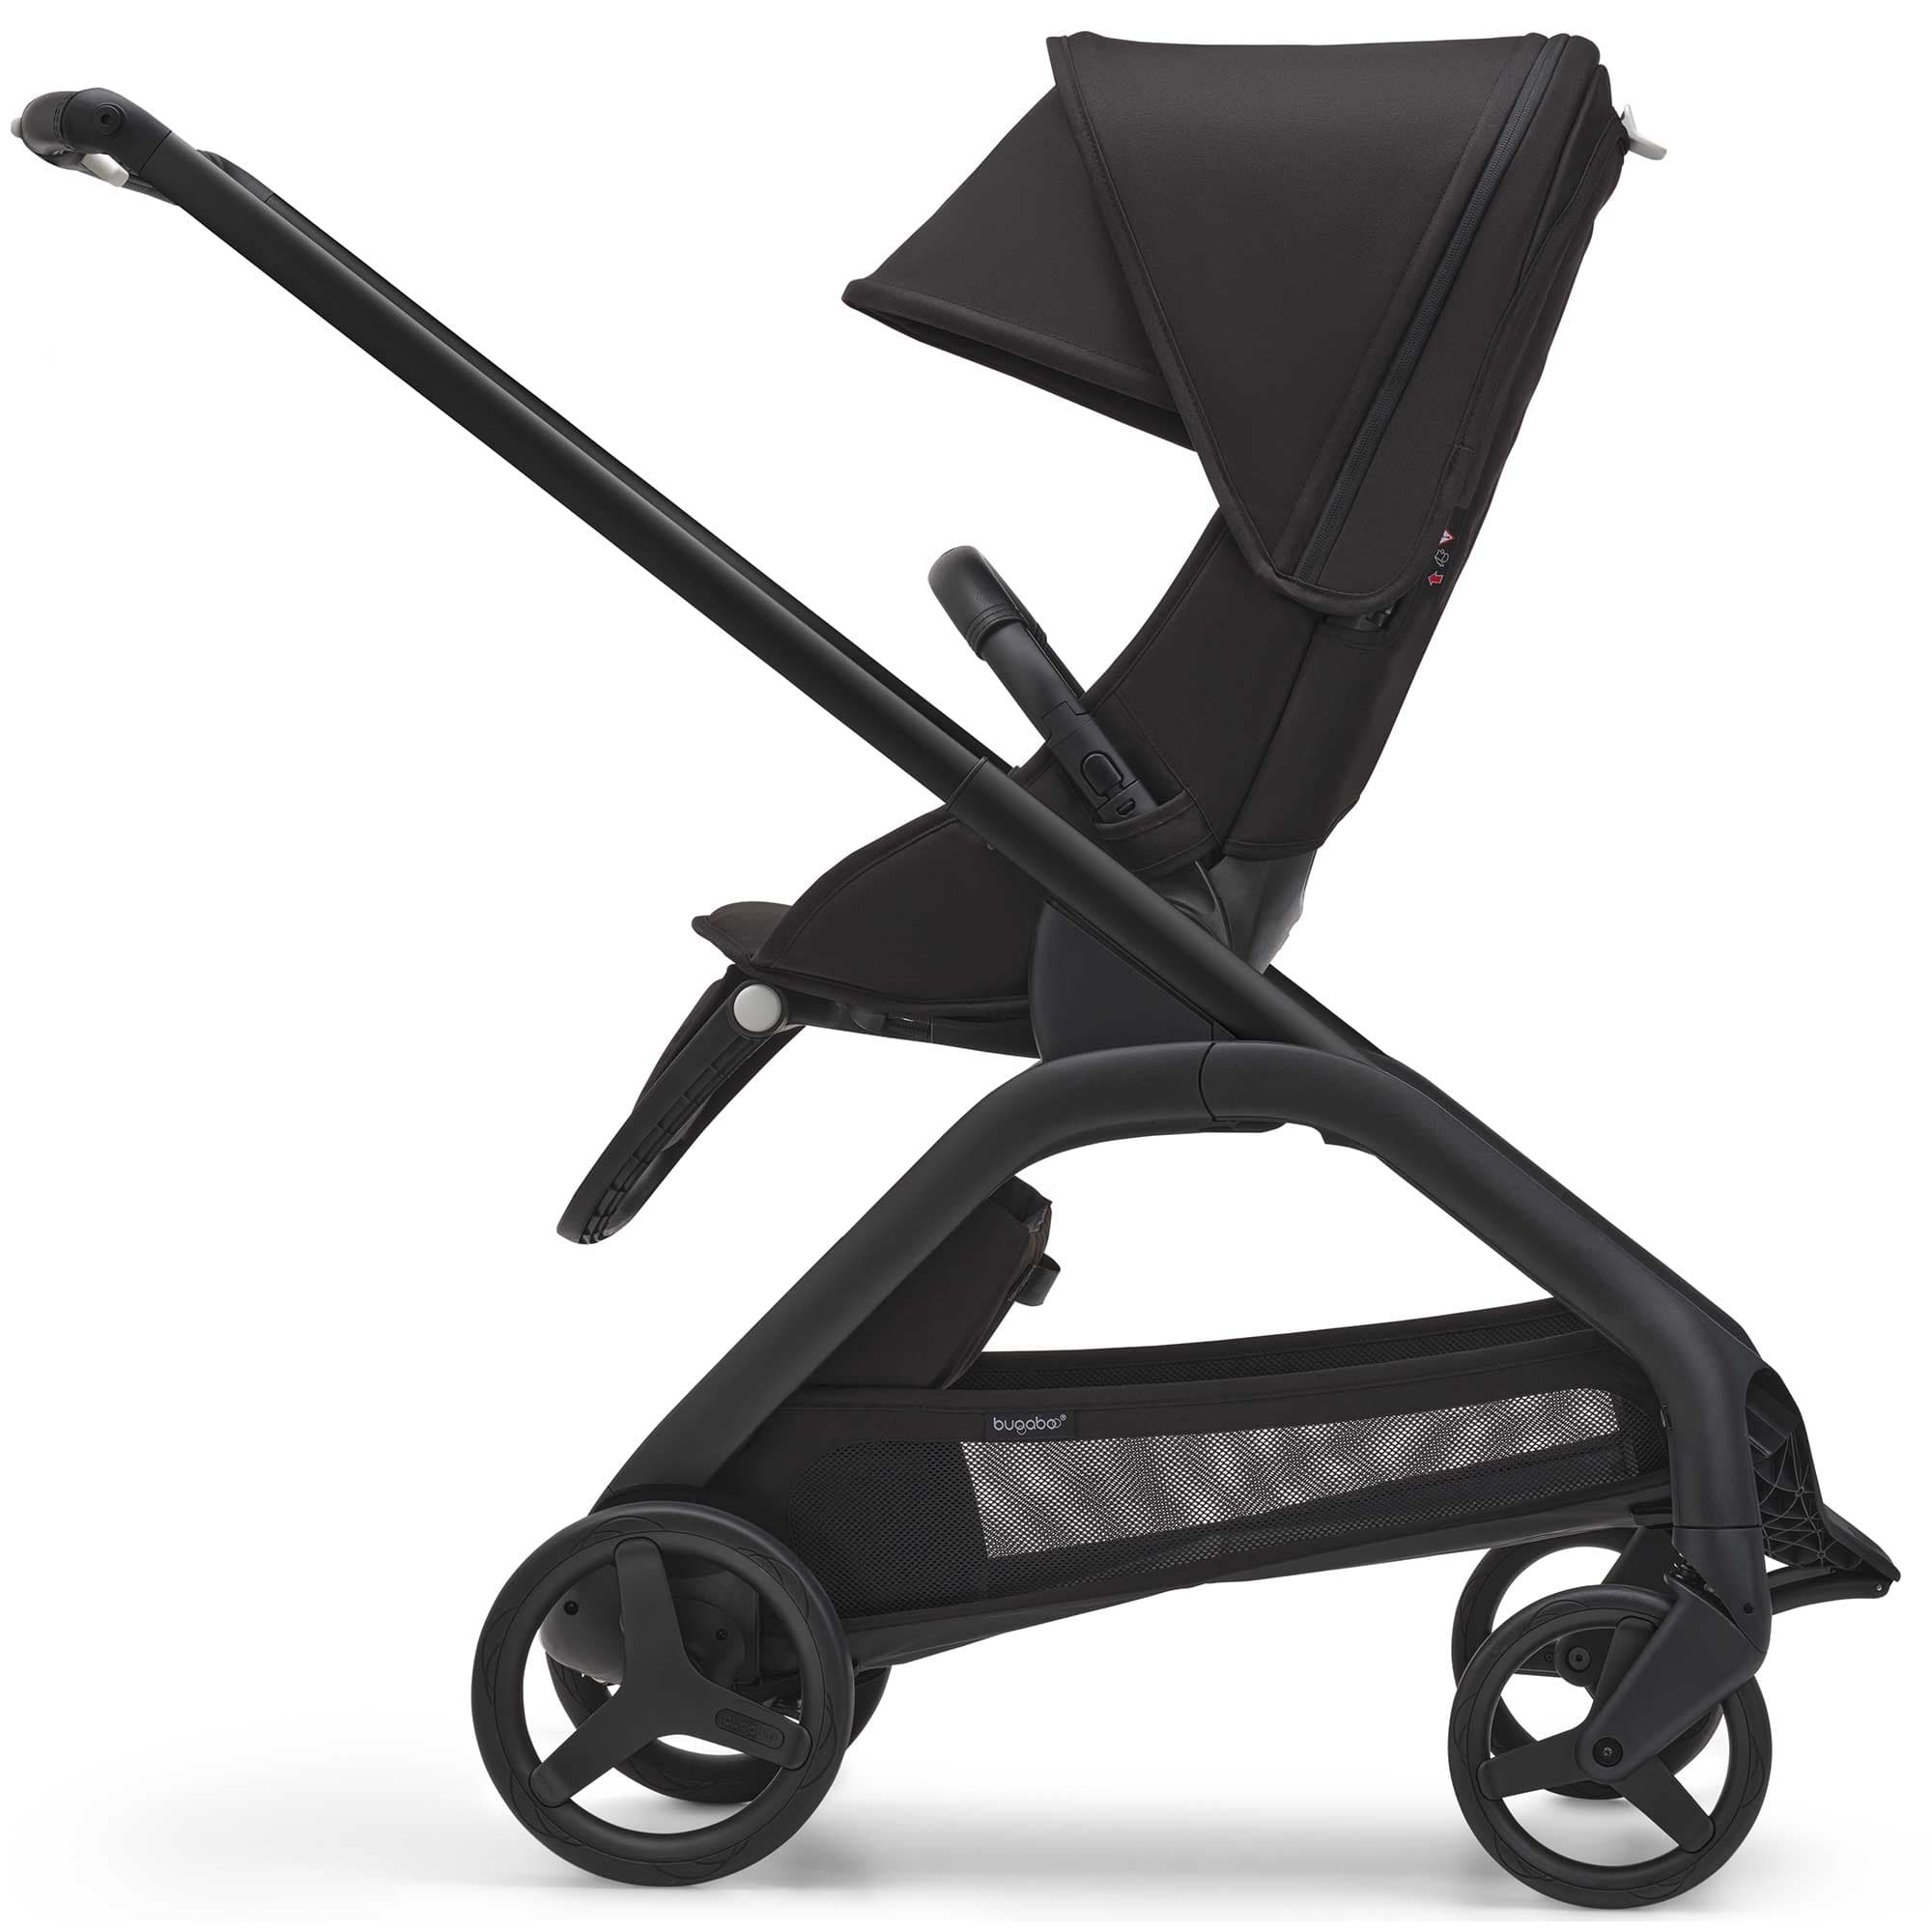 Bugaboo Dragonfly Complete Pushchair - Black/Midnight Black Pushchairs & Buggies 100176040 8717447448044